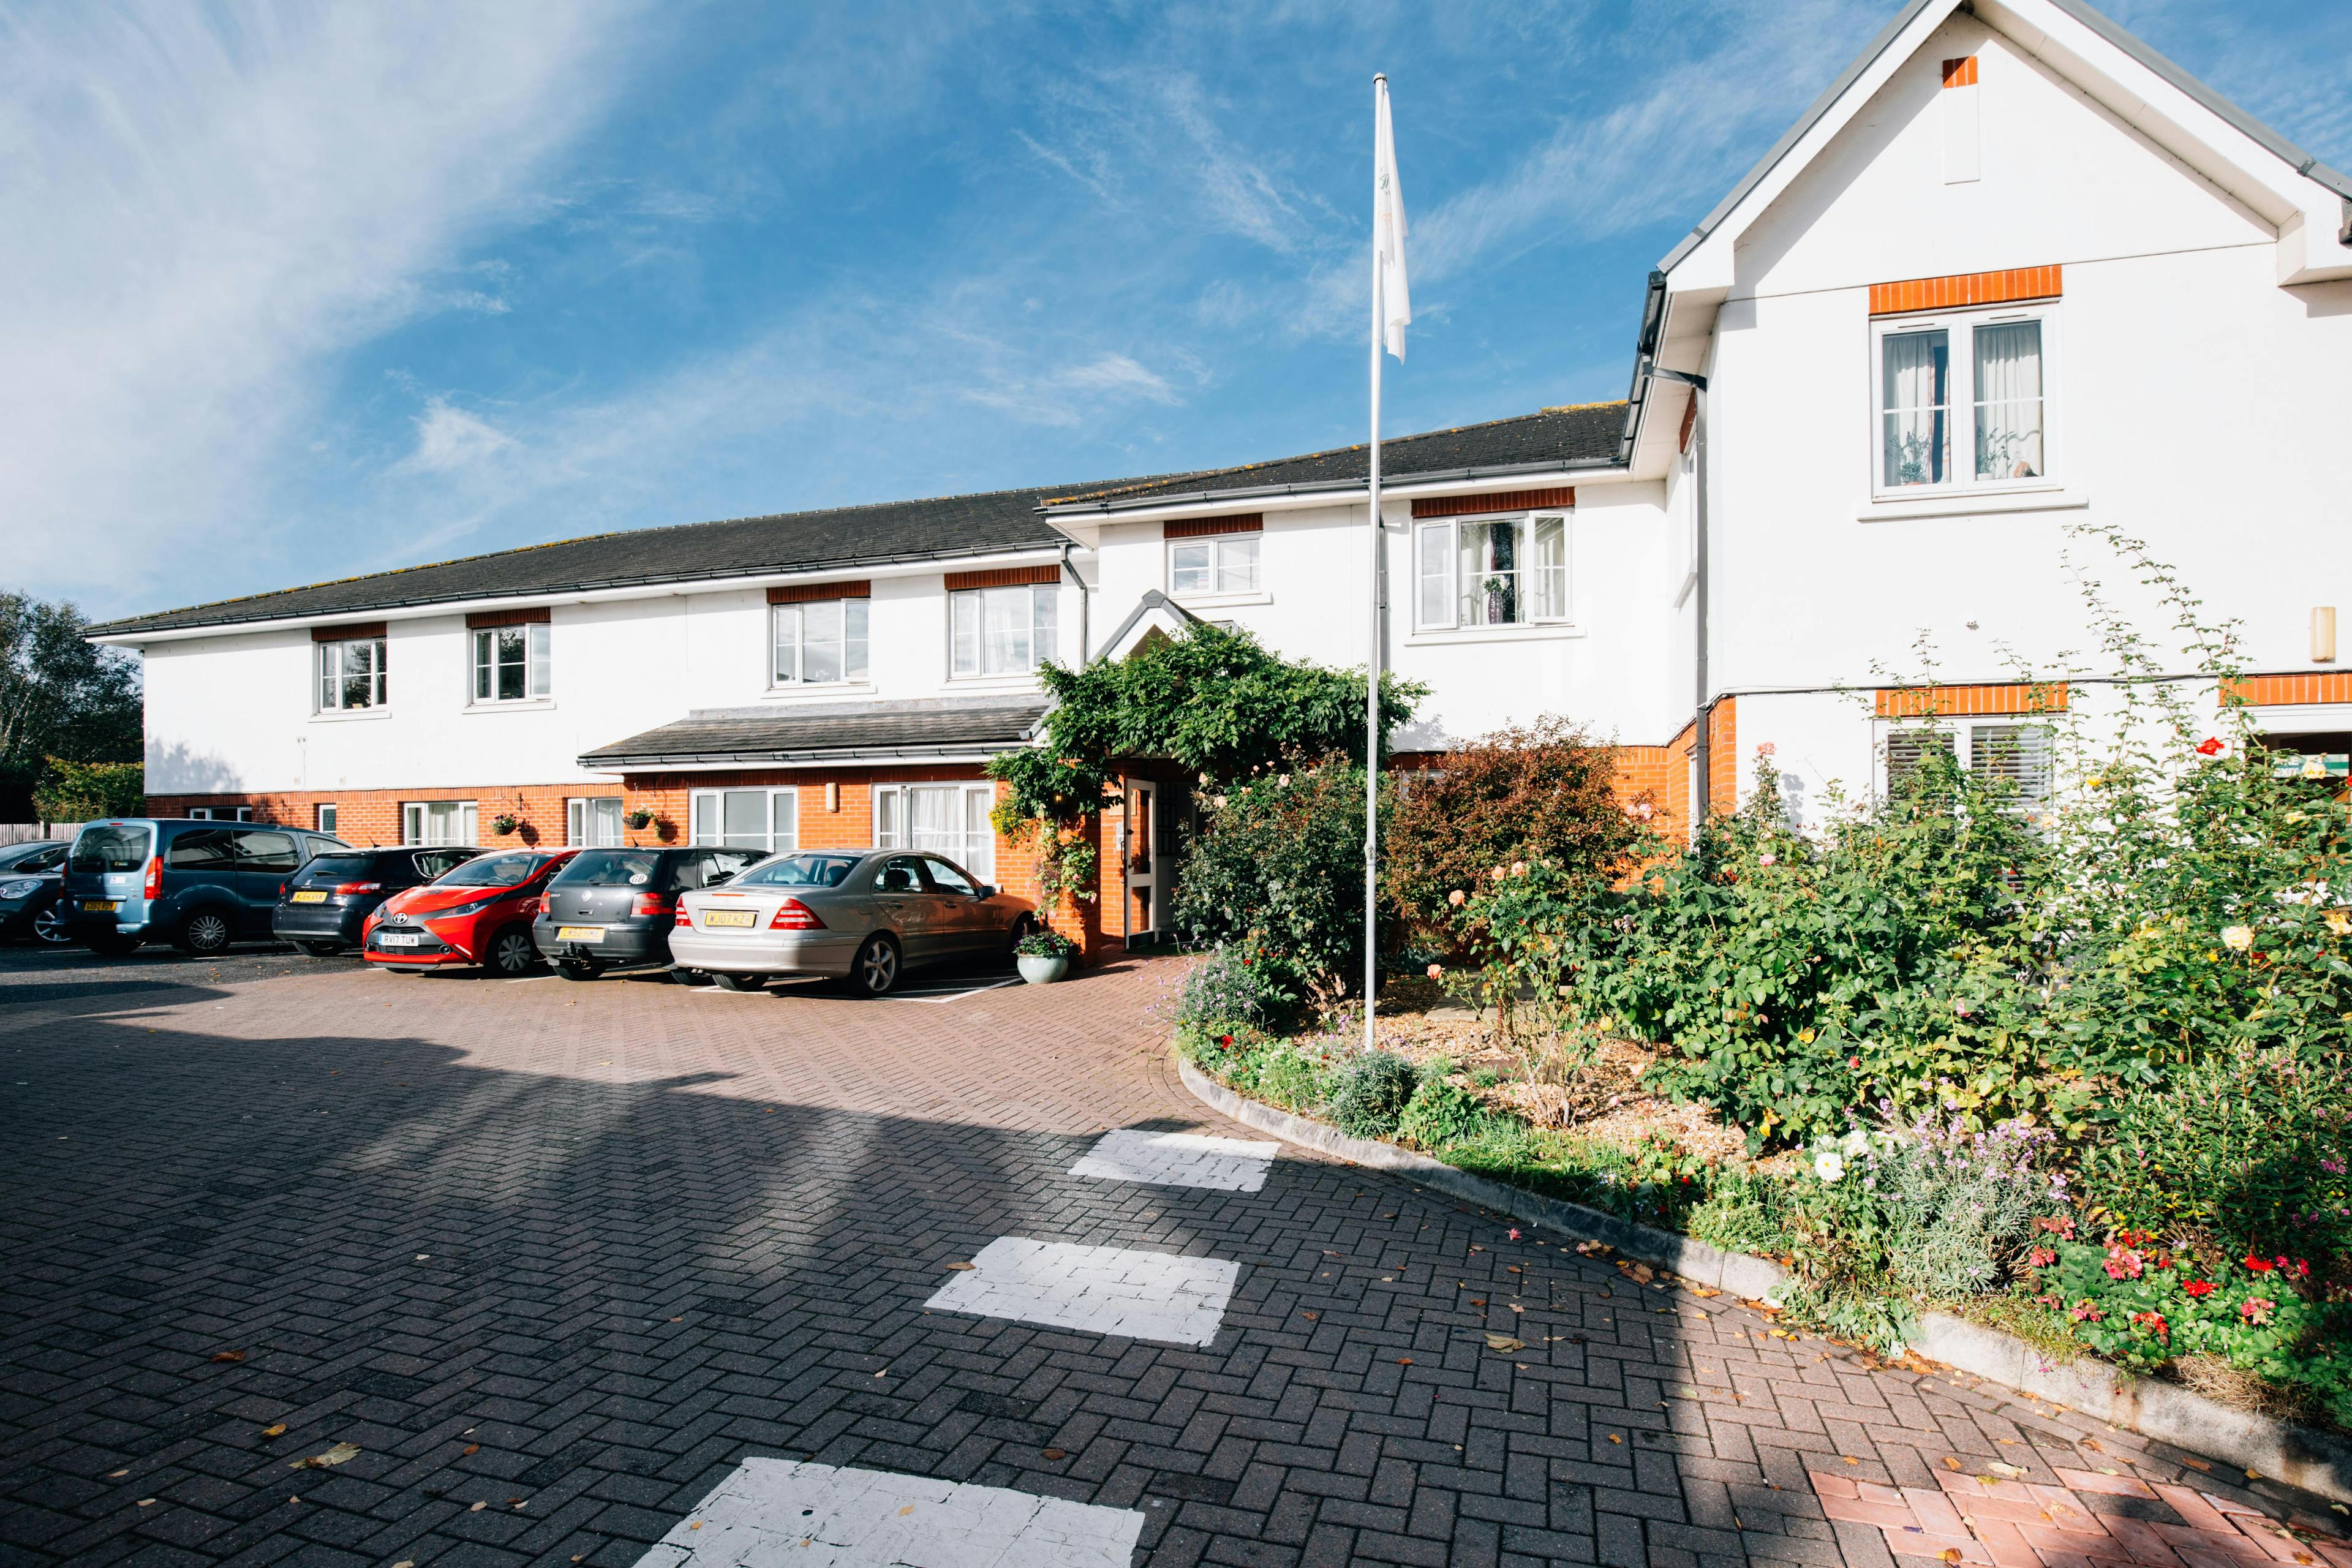 Exterior at Lucerne House Care Home in Exeter, Devon